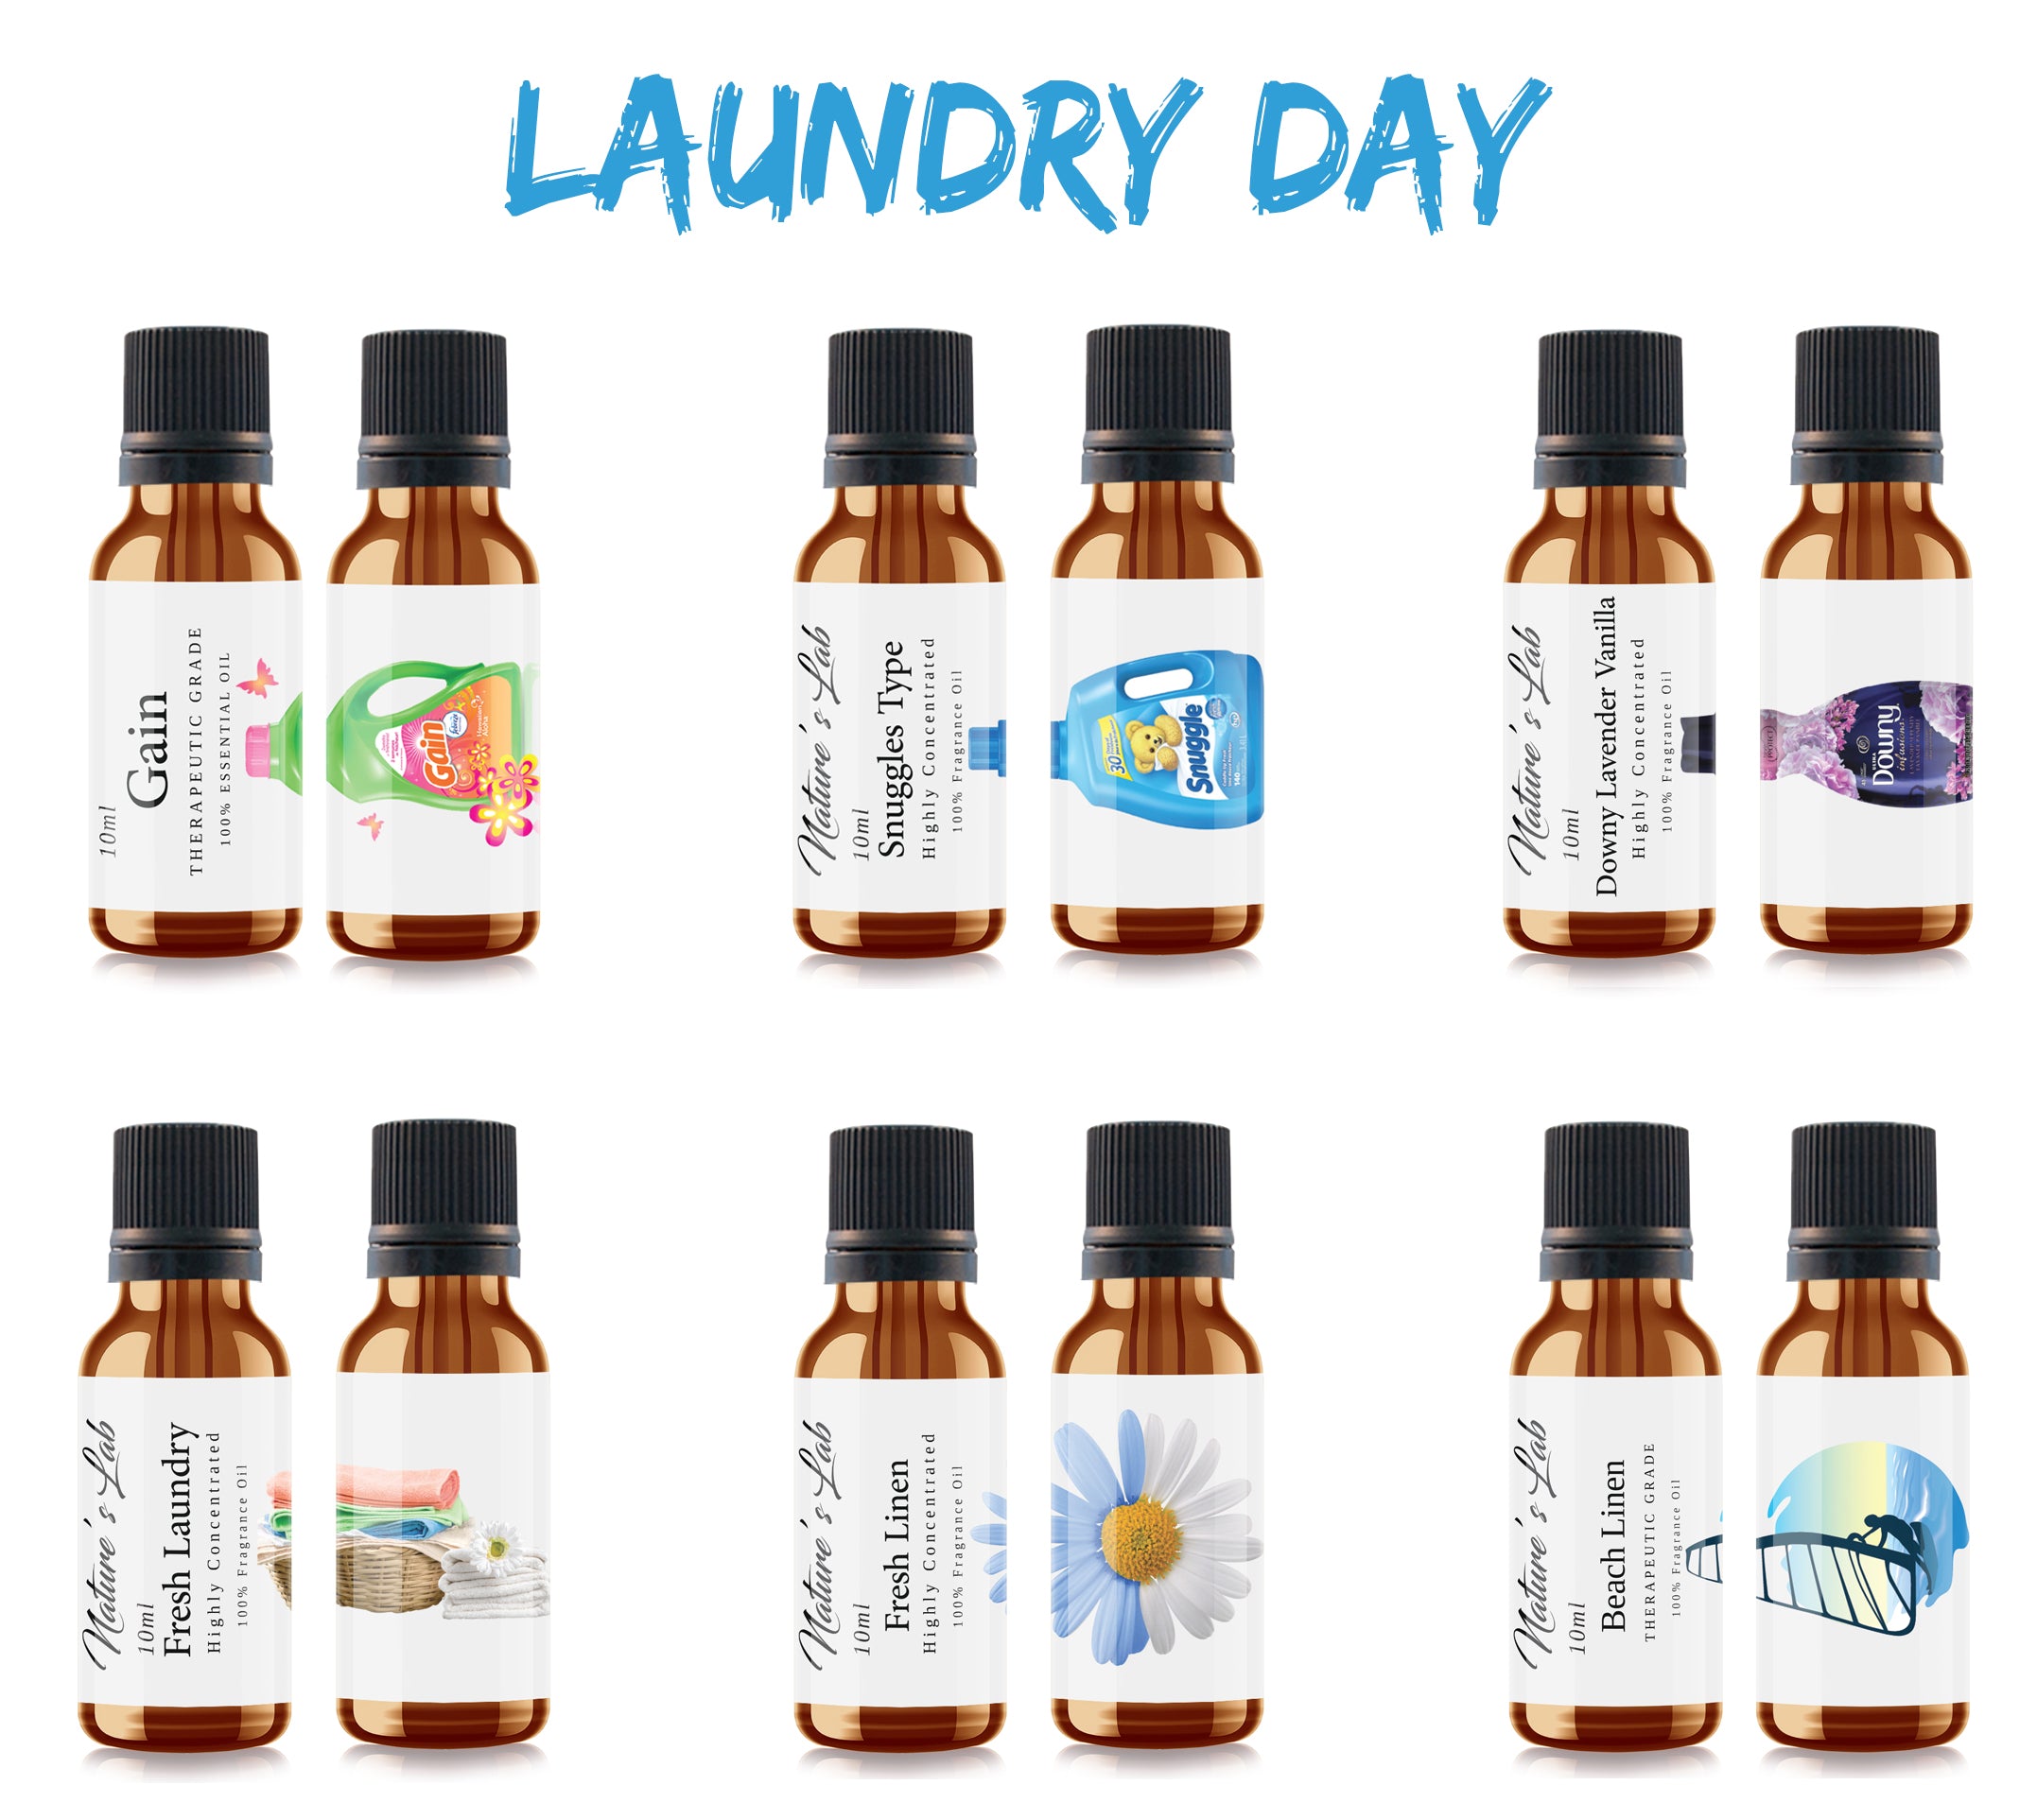 Laundry Day Fragrance Oil 6-Pack - Natural Sister's / Nature's Lab